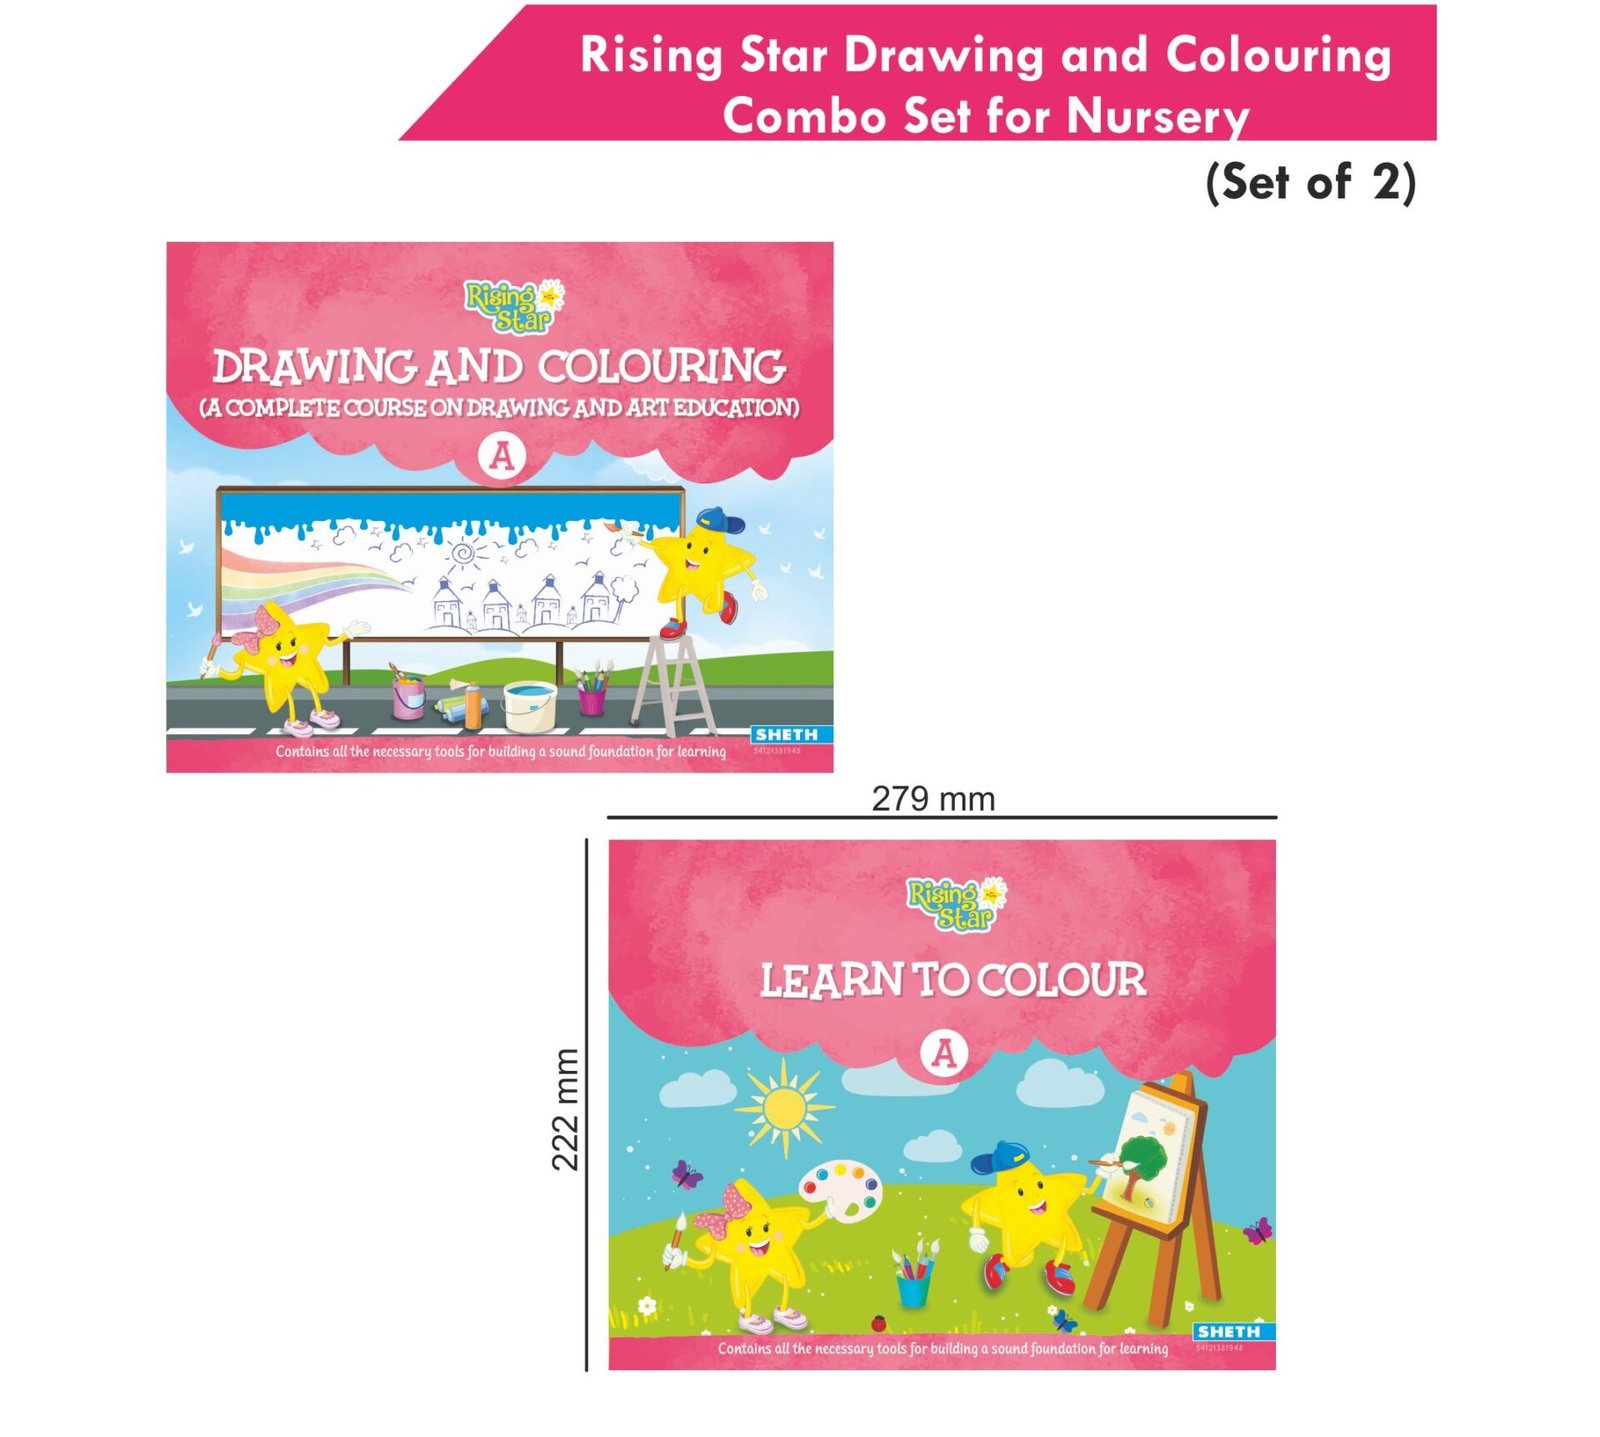 Rising Star Drawing and Colouring Combo Set for Nursery Set of 2 2